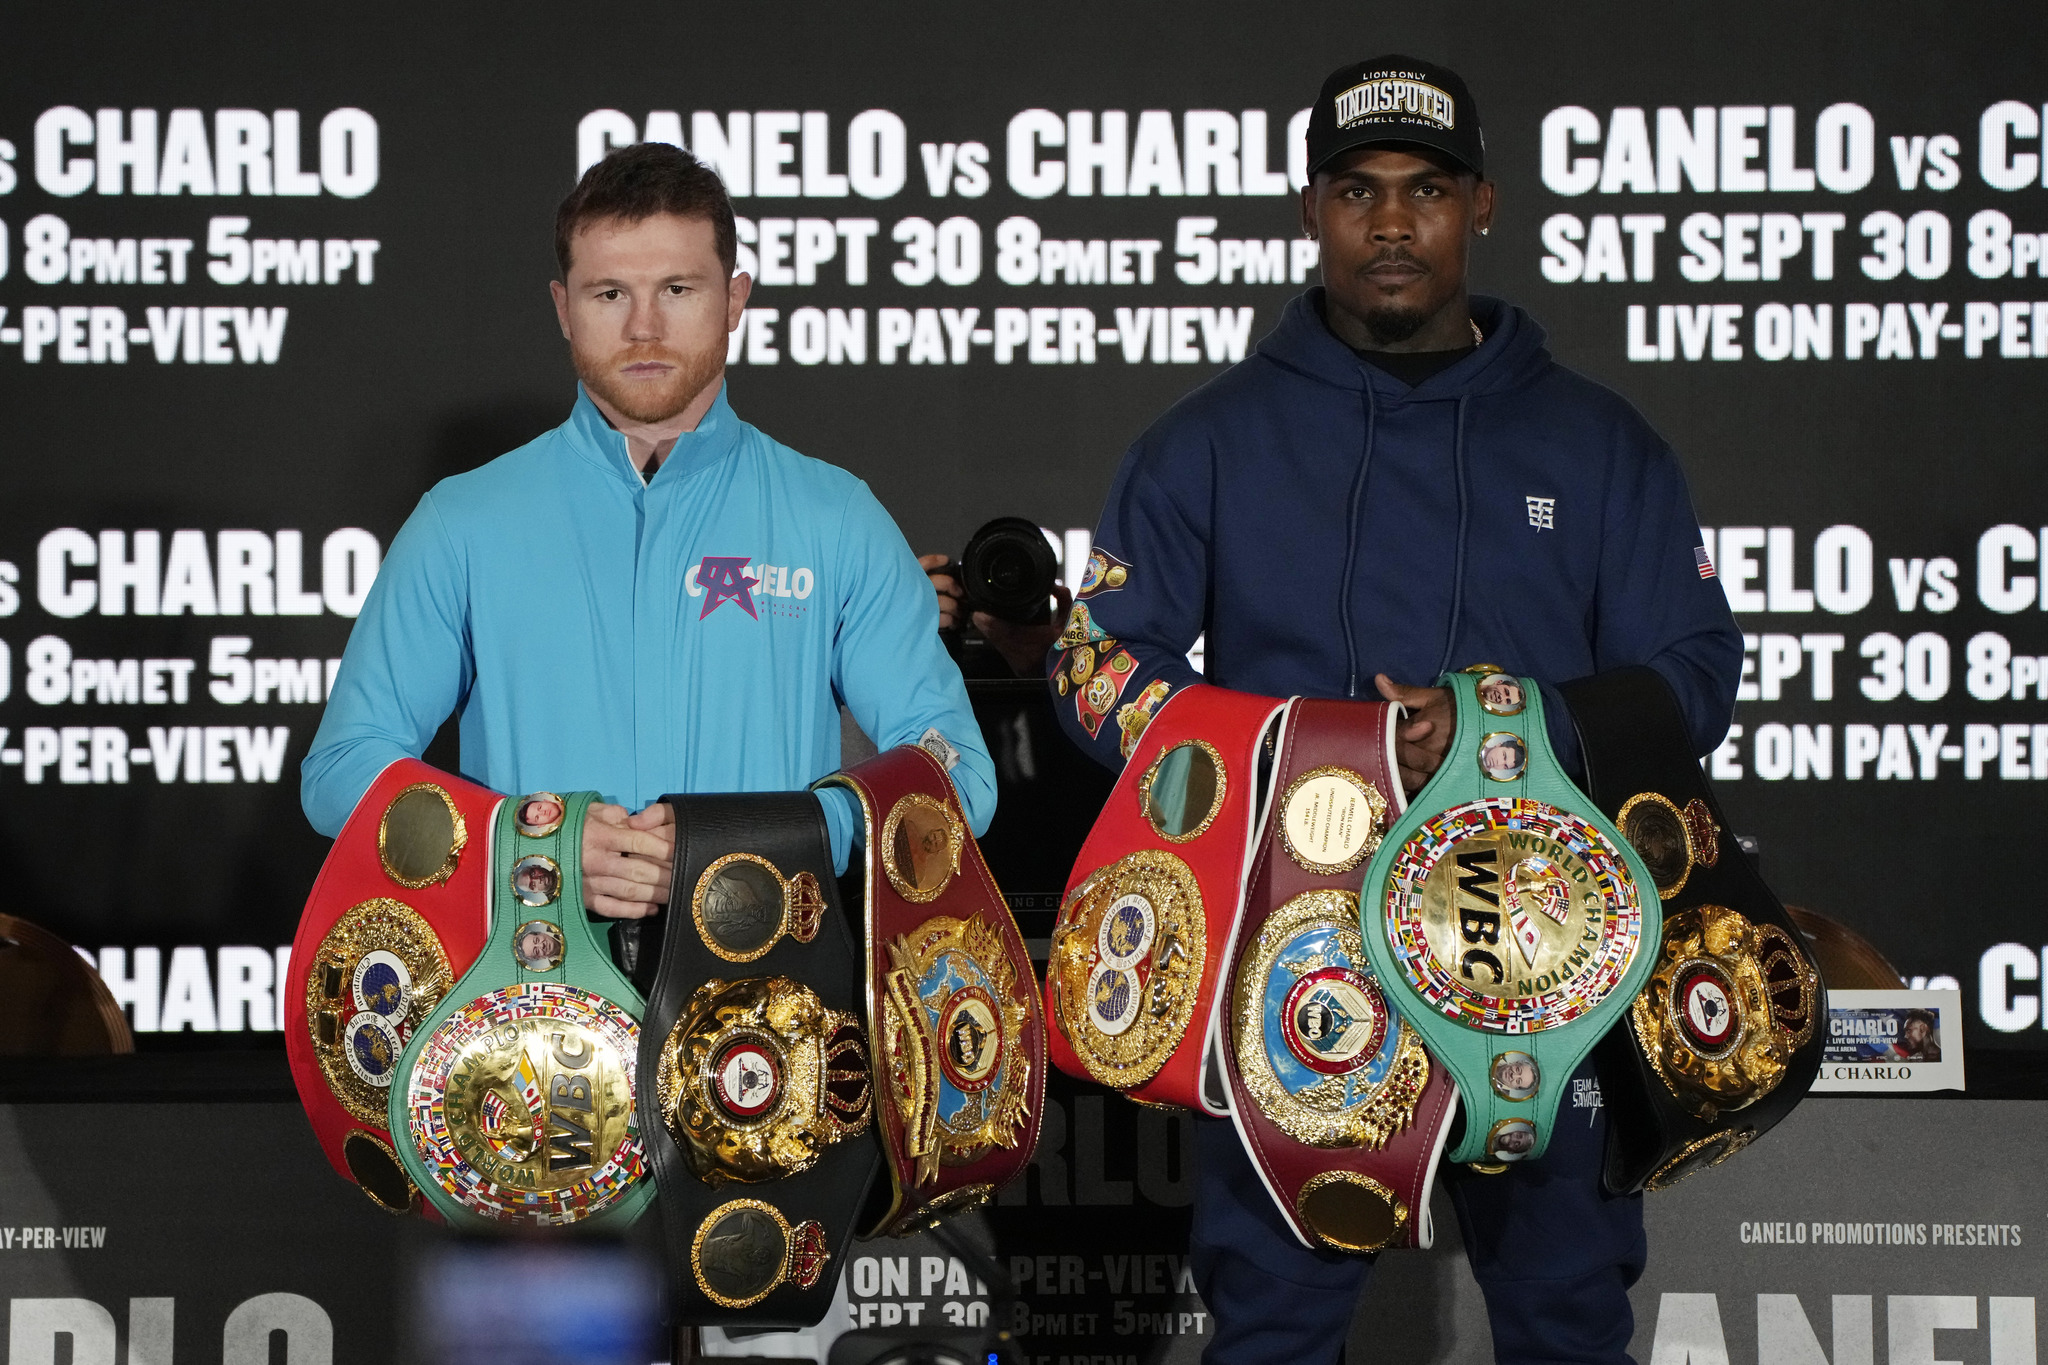 Canelo Alvarez's reaction to Jermell Charlo's spectacular physical transformation